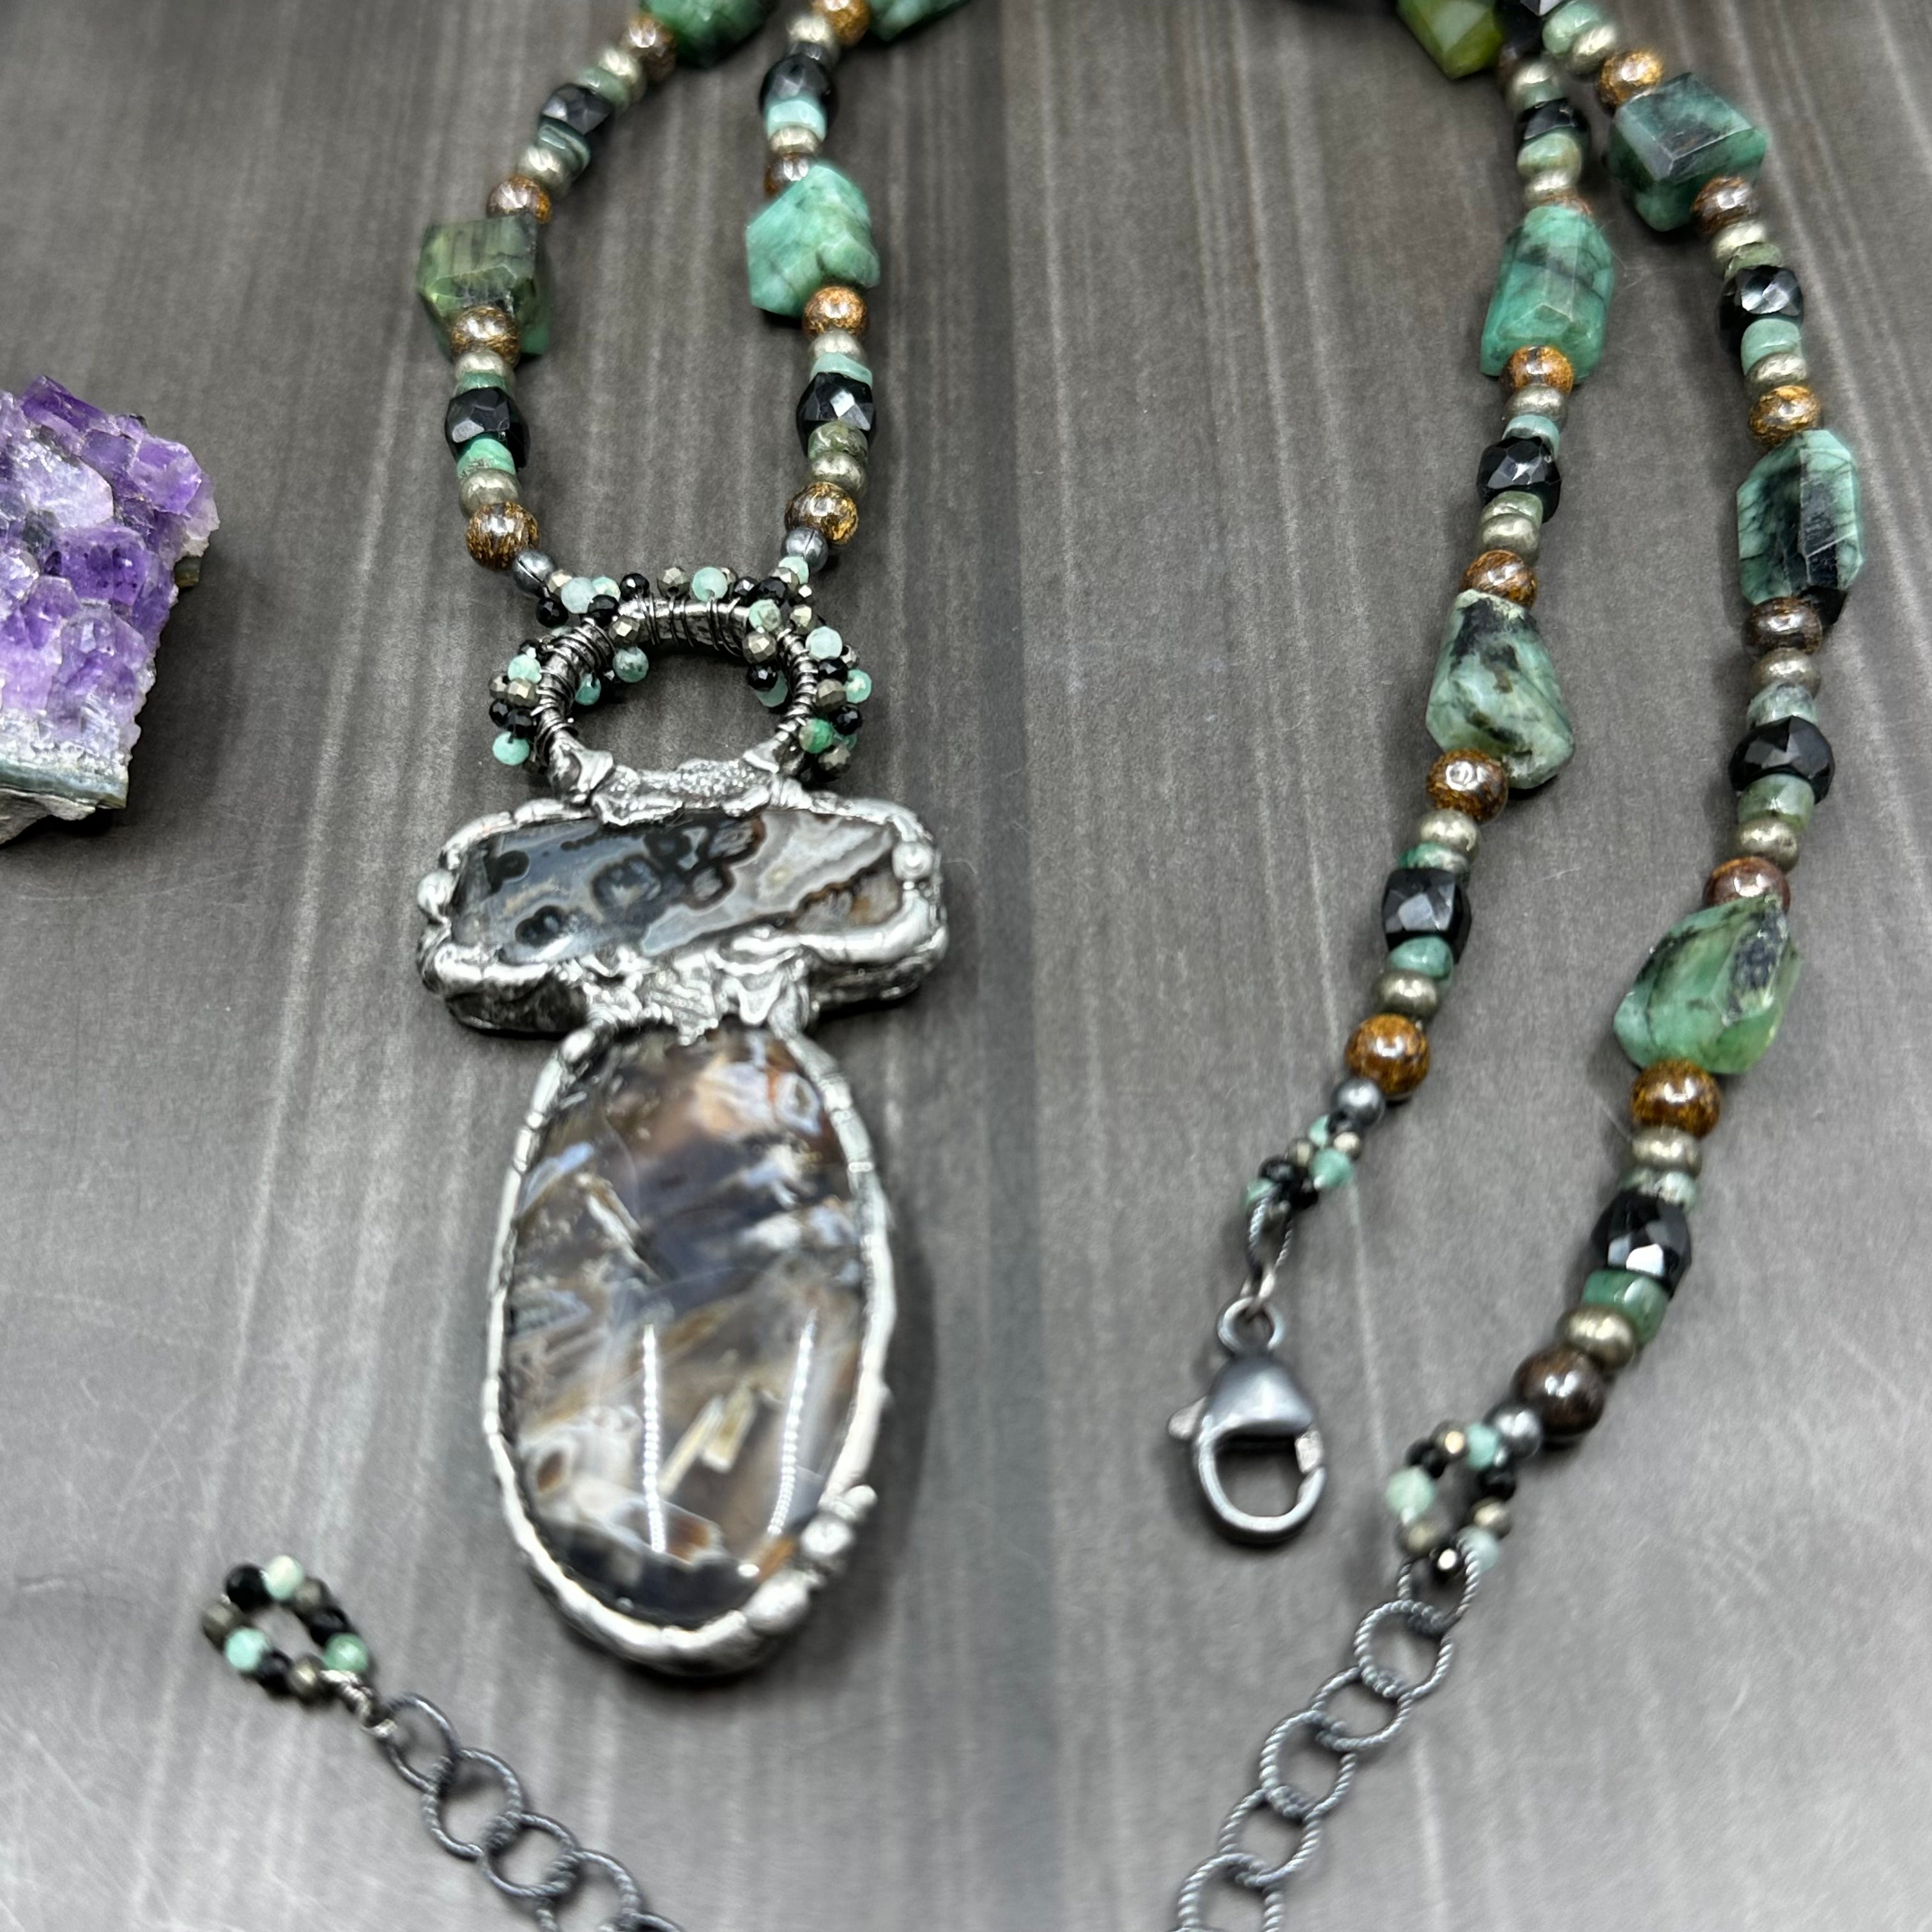 Emerald, Black spinel, Bronzite, and Pyrite Focal Necklace